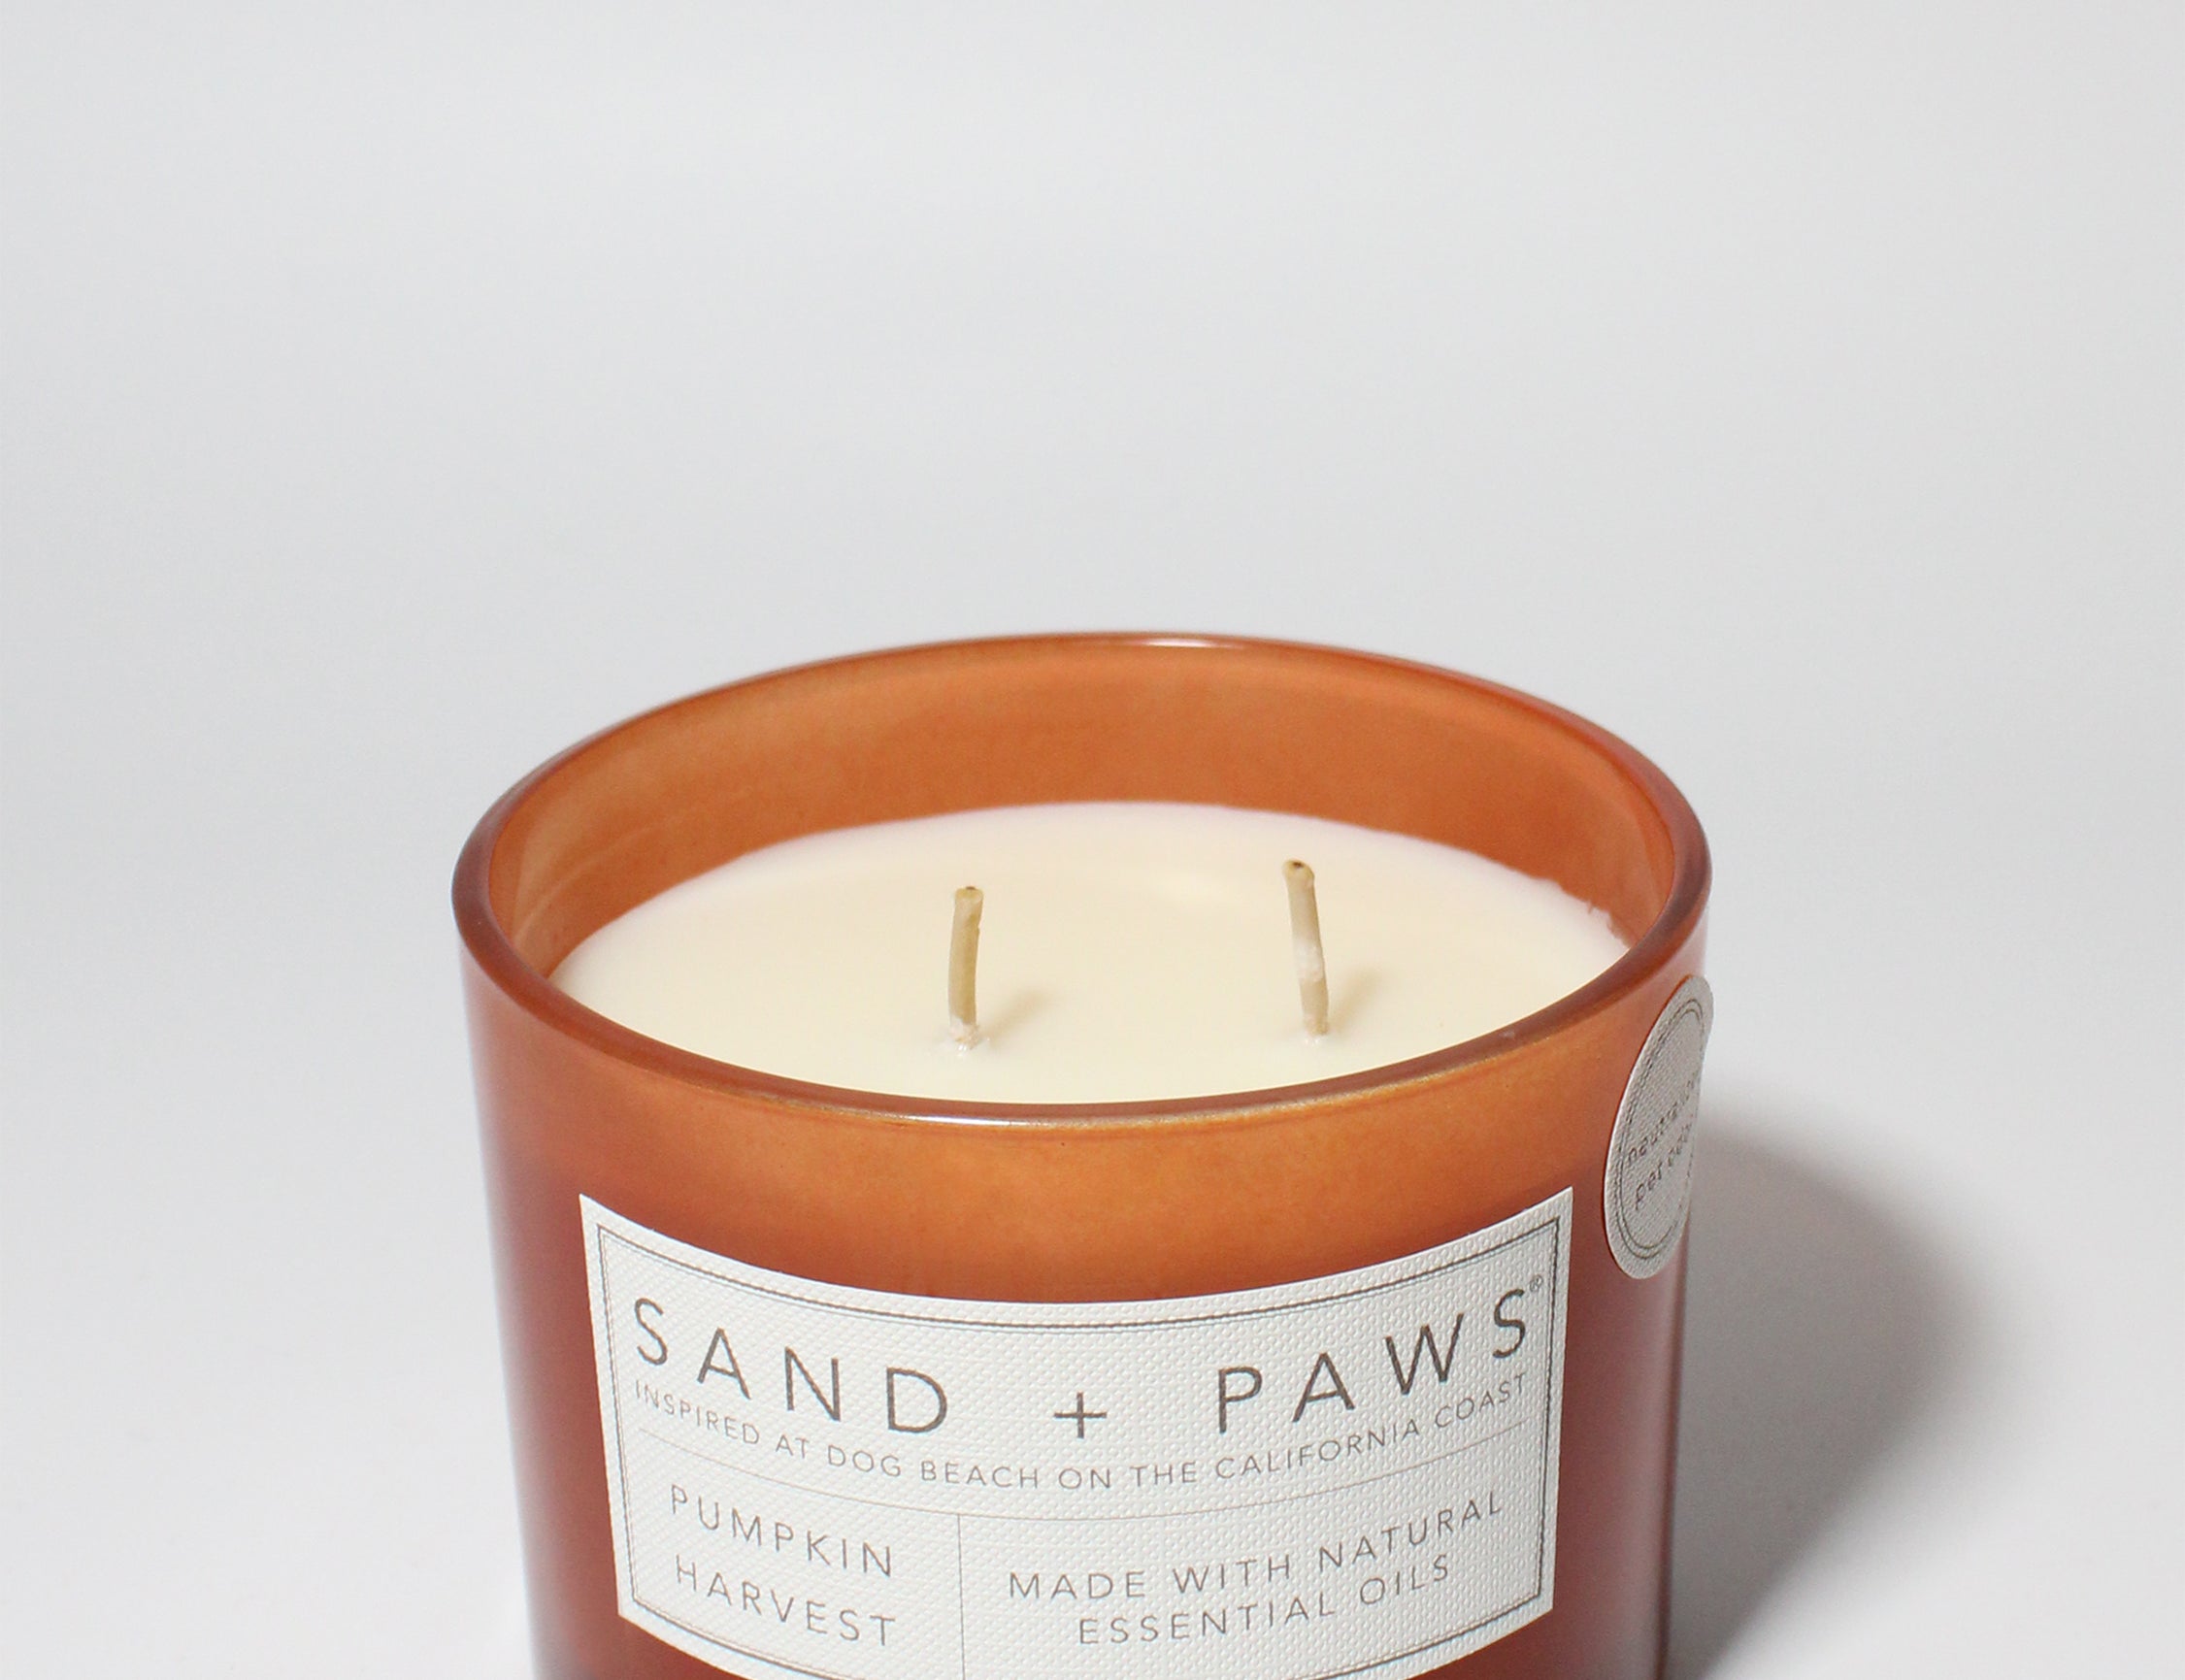 Sand + Paws Pumpkin Harvest 12 oz scented candle Rusty Orange vessel with Painted Dogs wood lid